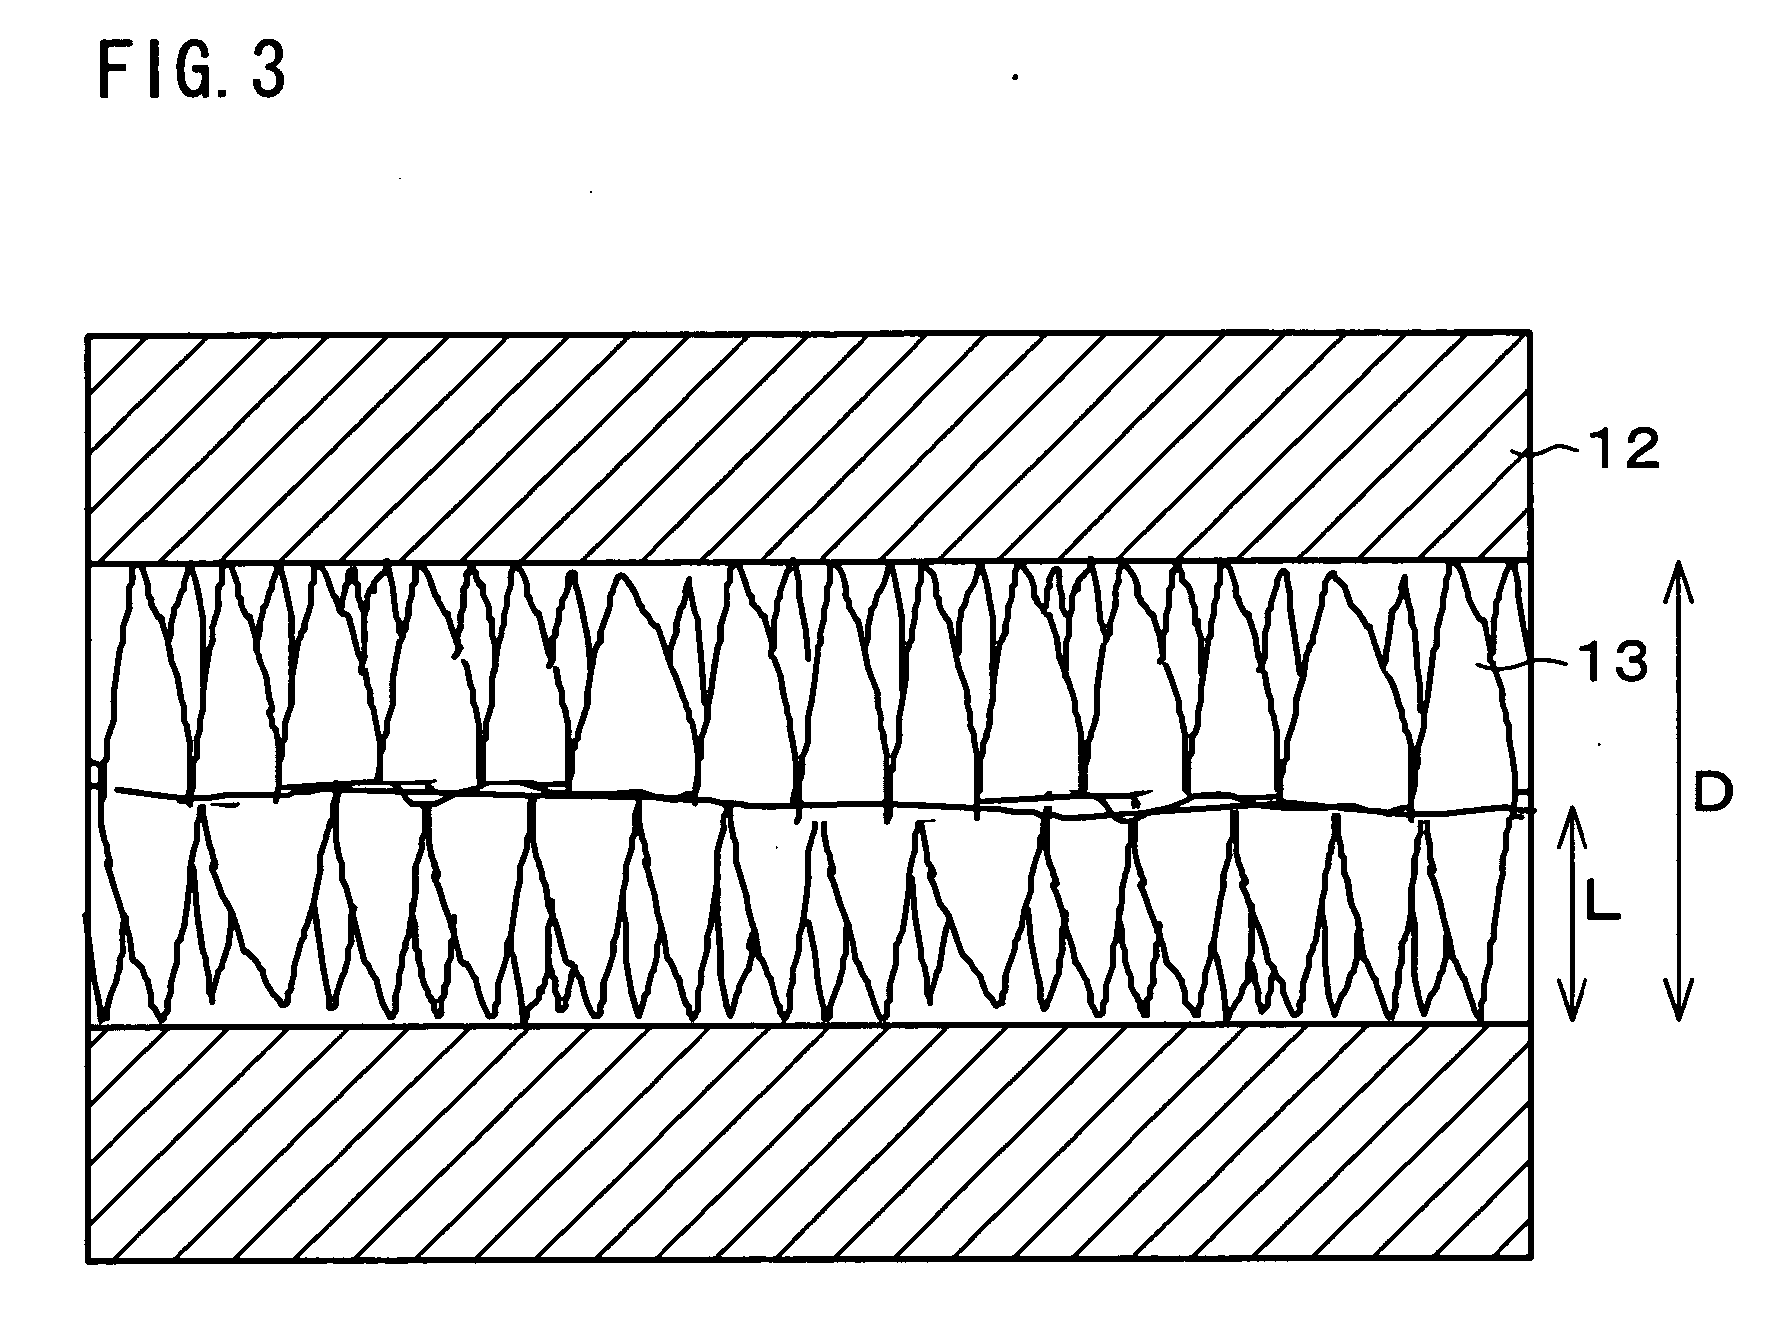 Crystallized semiconductor device, method for producing same and crystallization apparatus